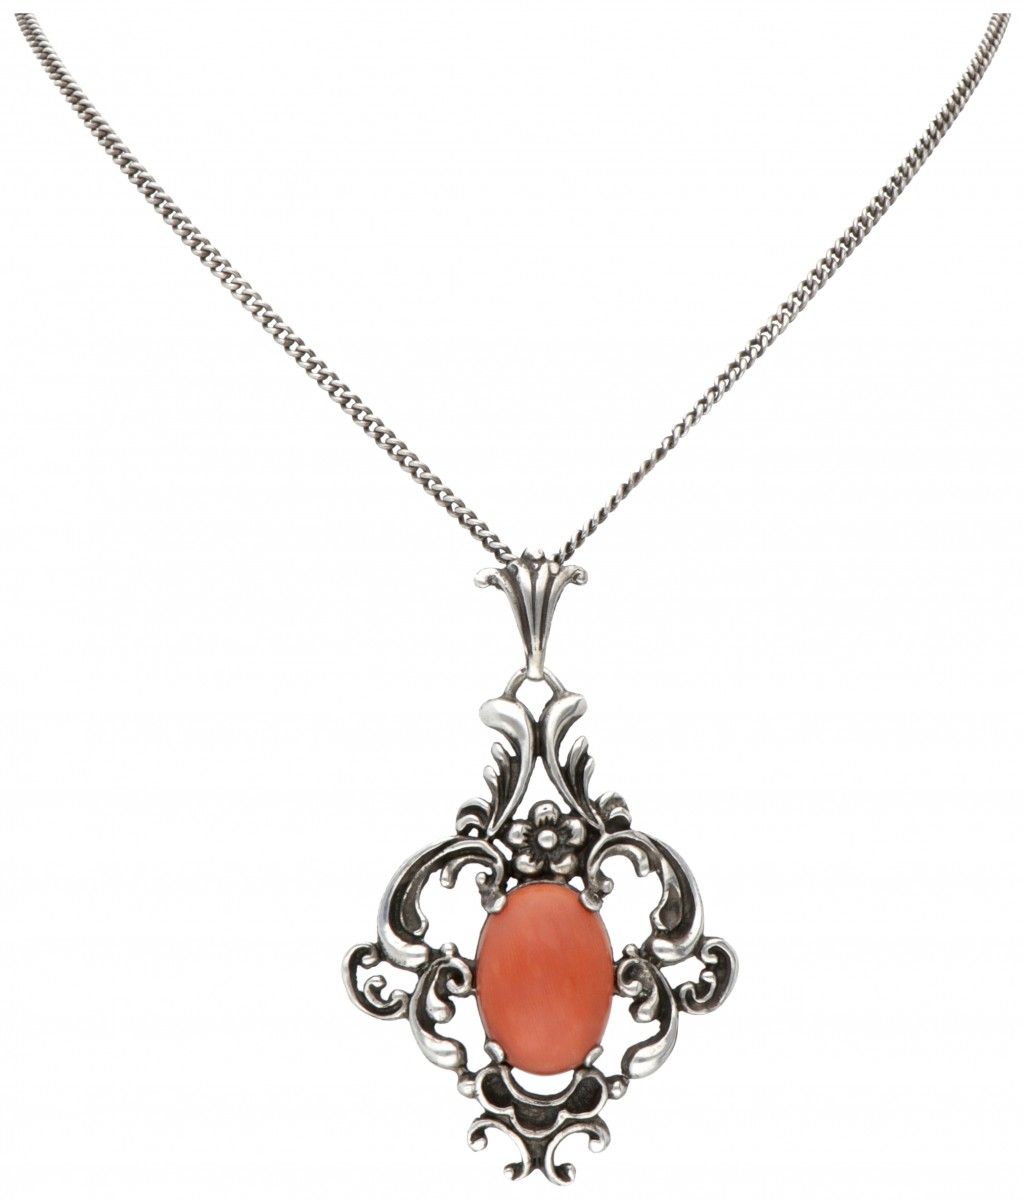 Silver necklace with pendant set with approx. 7.29 ct. Red coral - 835/1000. 印记。&hellip;